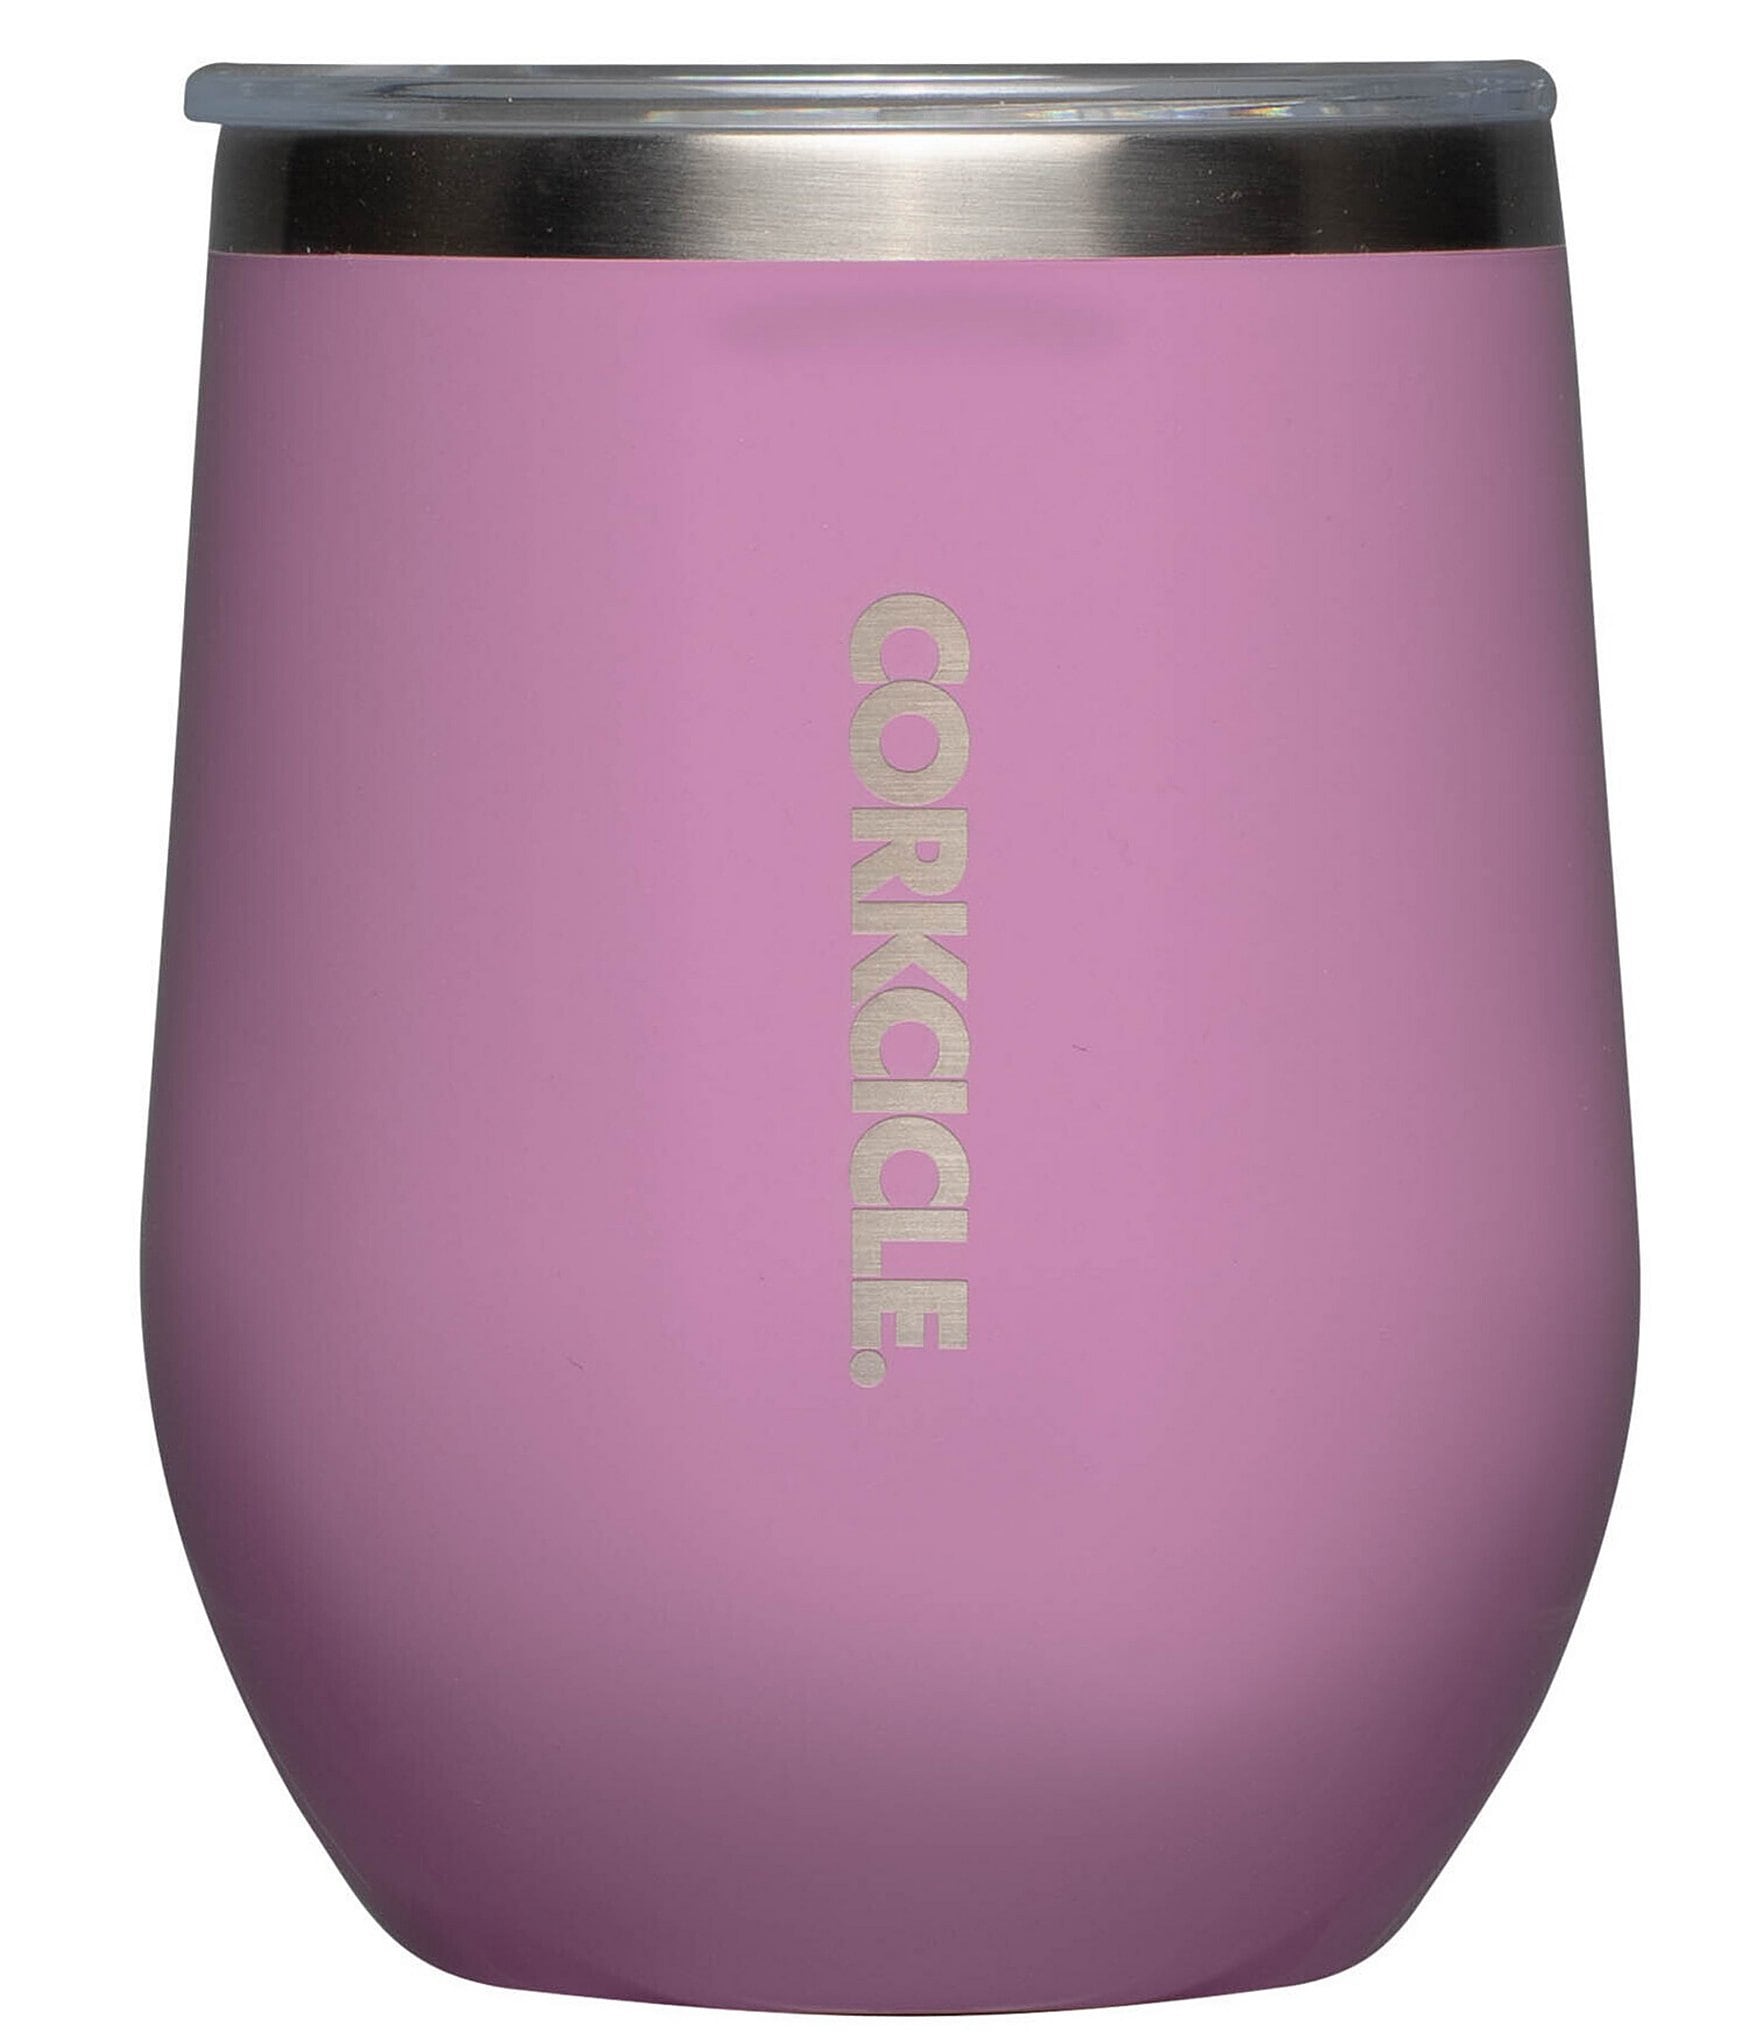 https://dimg.dillards.com/is/image/DillardsZoom/zoom/corkcicle-stainless-steel-triple-insulated-gloss-orchid-classic-stemless-wine-tumbler/00000000_zi_20383828.jpg